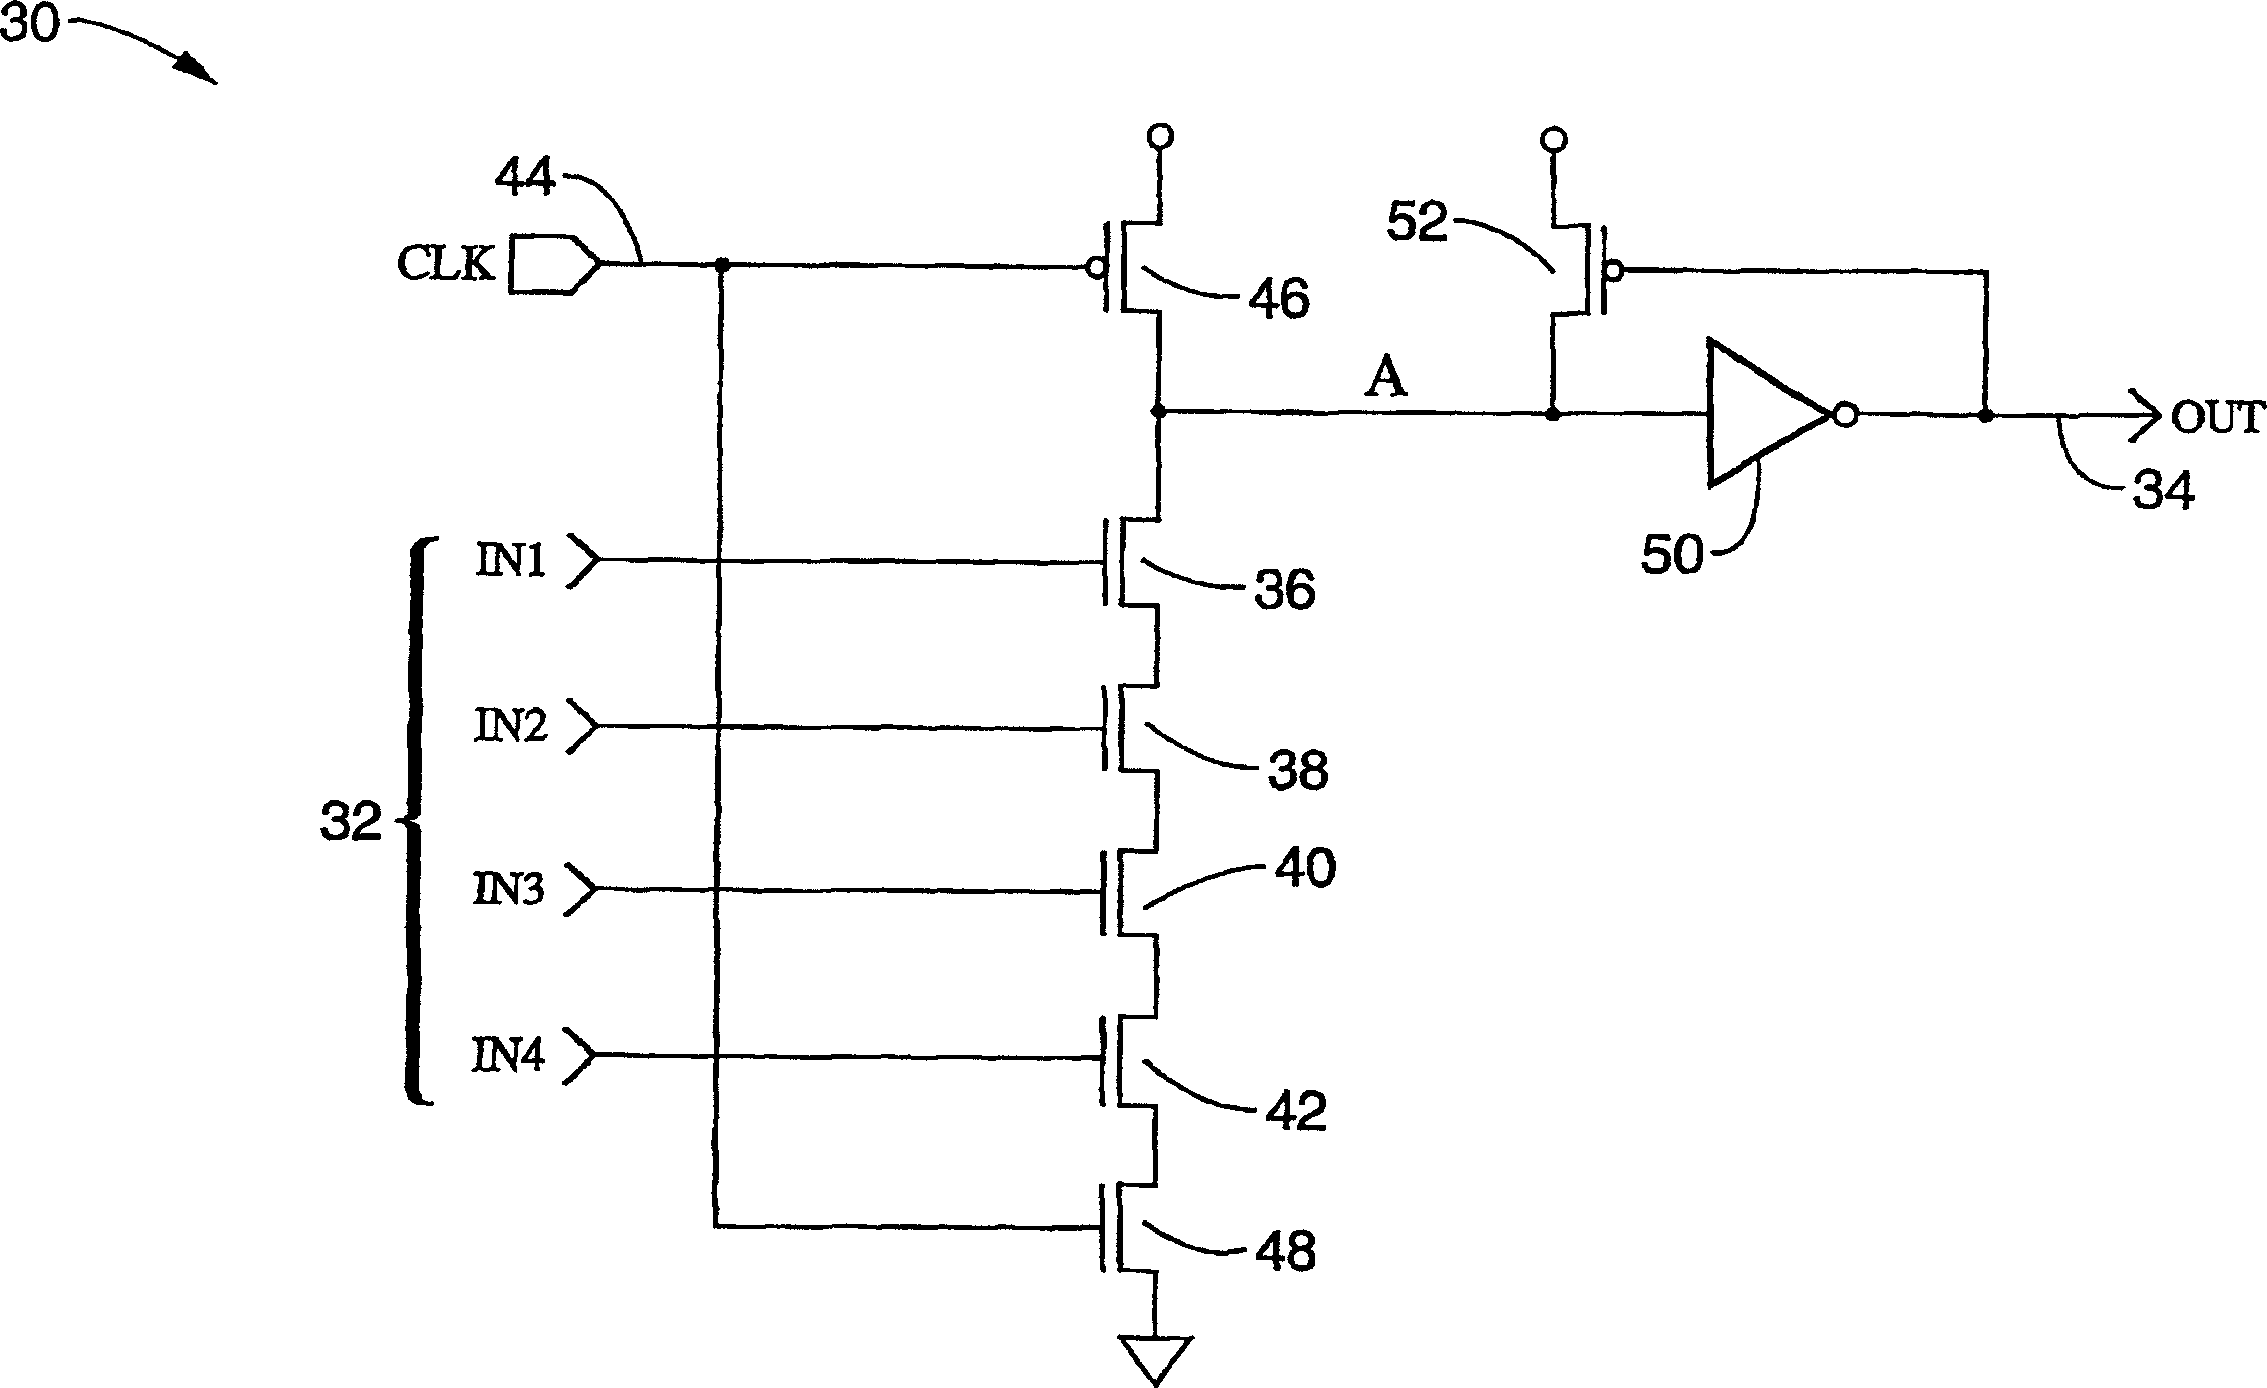 Event driven dynamic logic for reducing power consumption